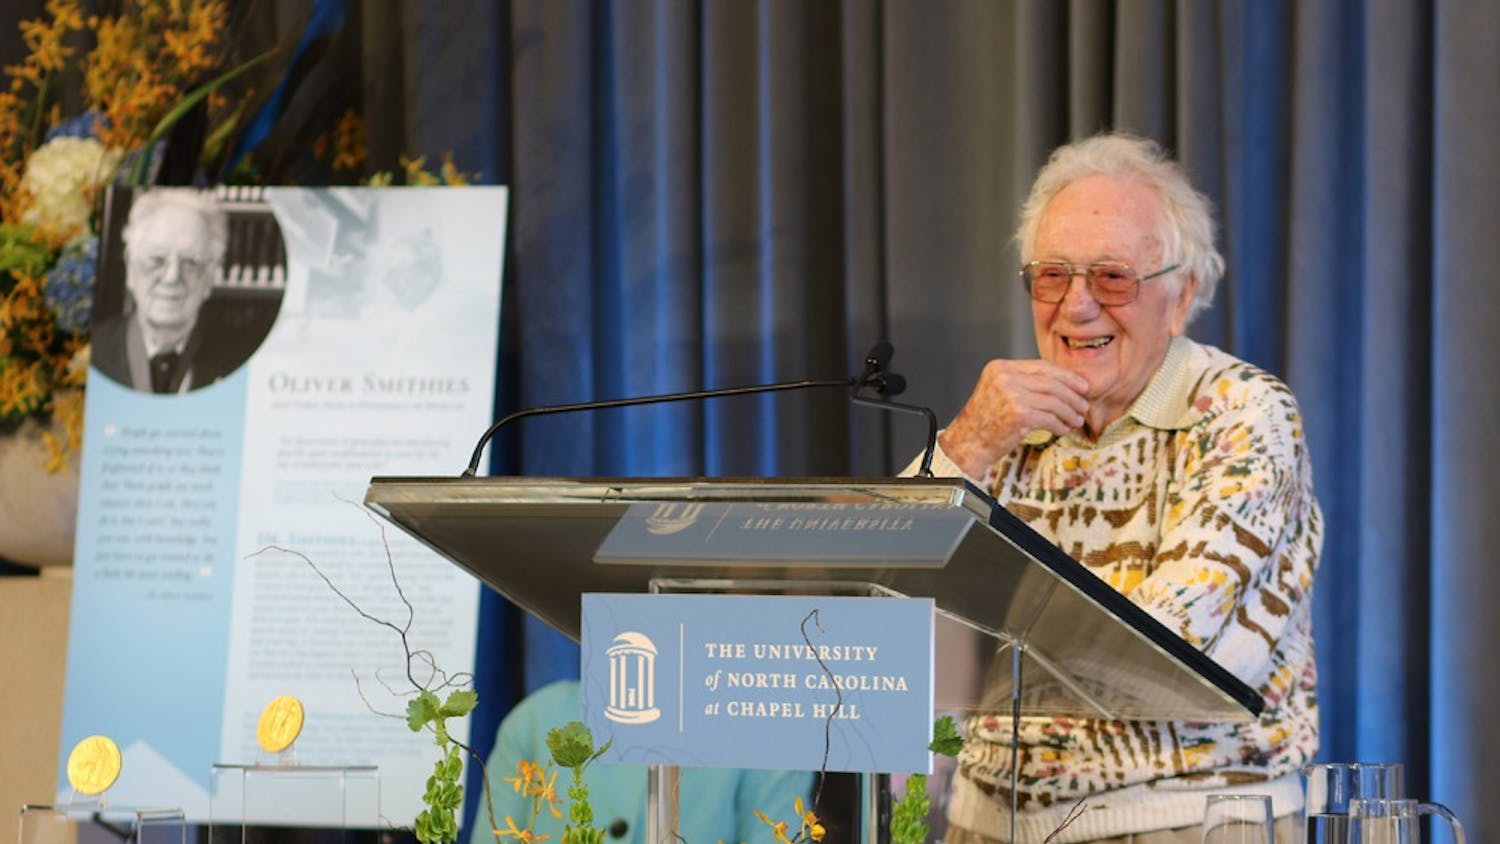 Dr. Smithies, Nobel Prize winner and UNC professor, spoke at a ceremony in Davis library honoring his and Dr. Sancar's achievements, a fellow UNC professor and Nobel Prize winner.